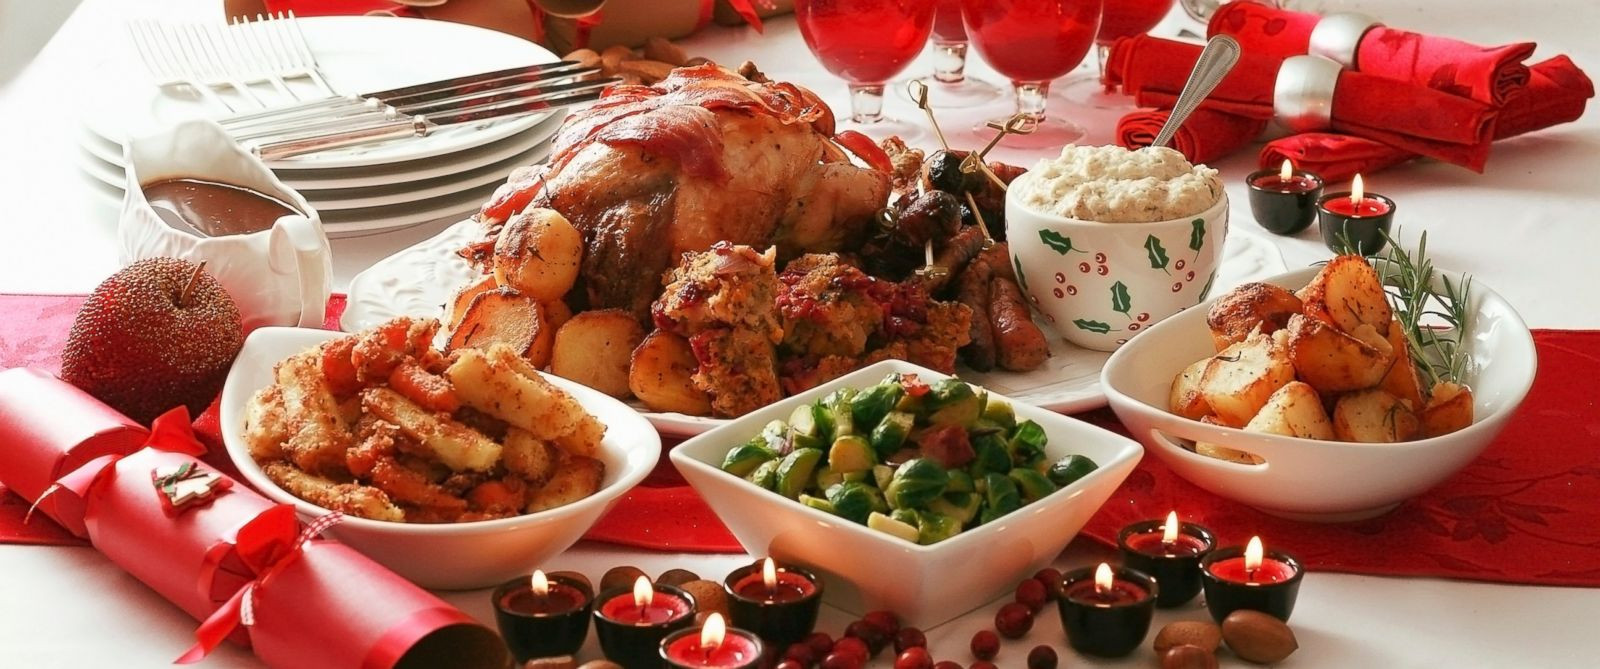 Images Of Christmas Dinners
 How Many Calories the Average American Eats on Christmas